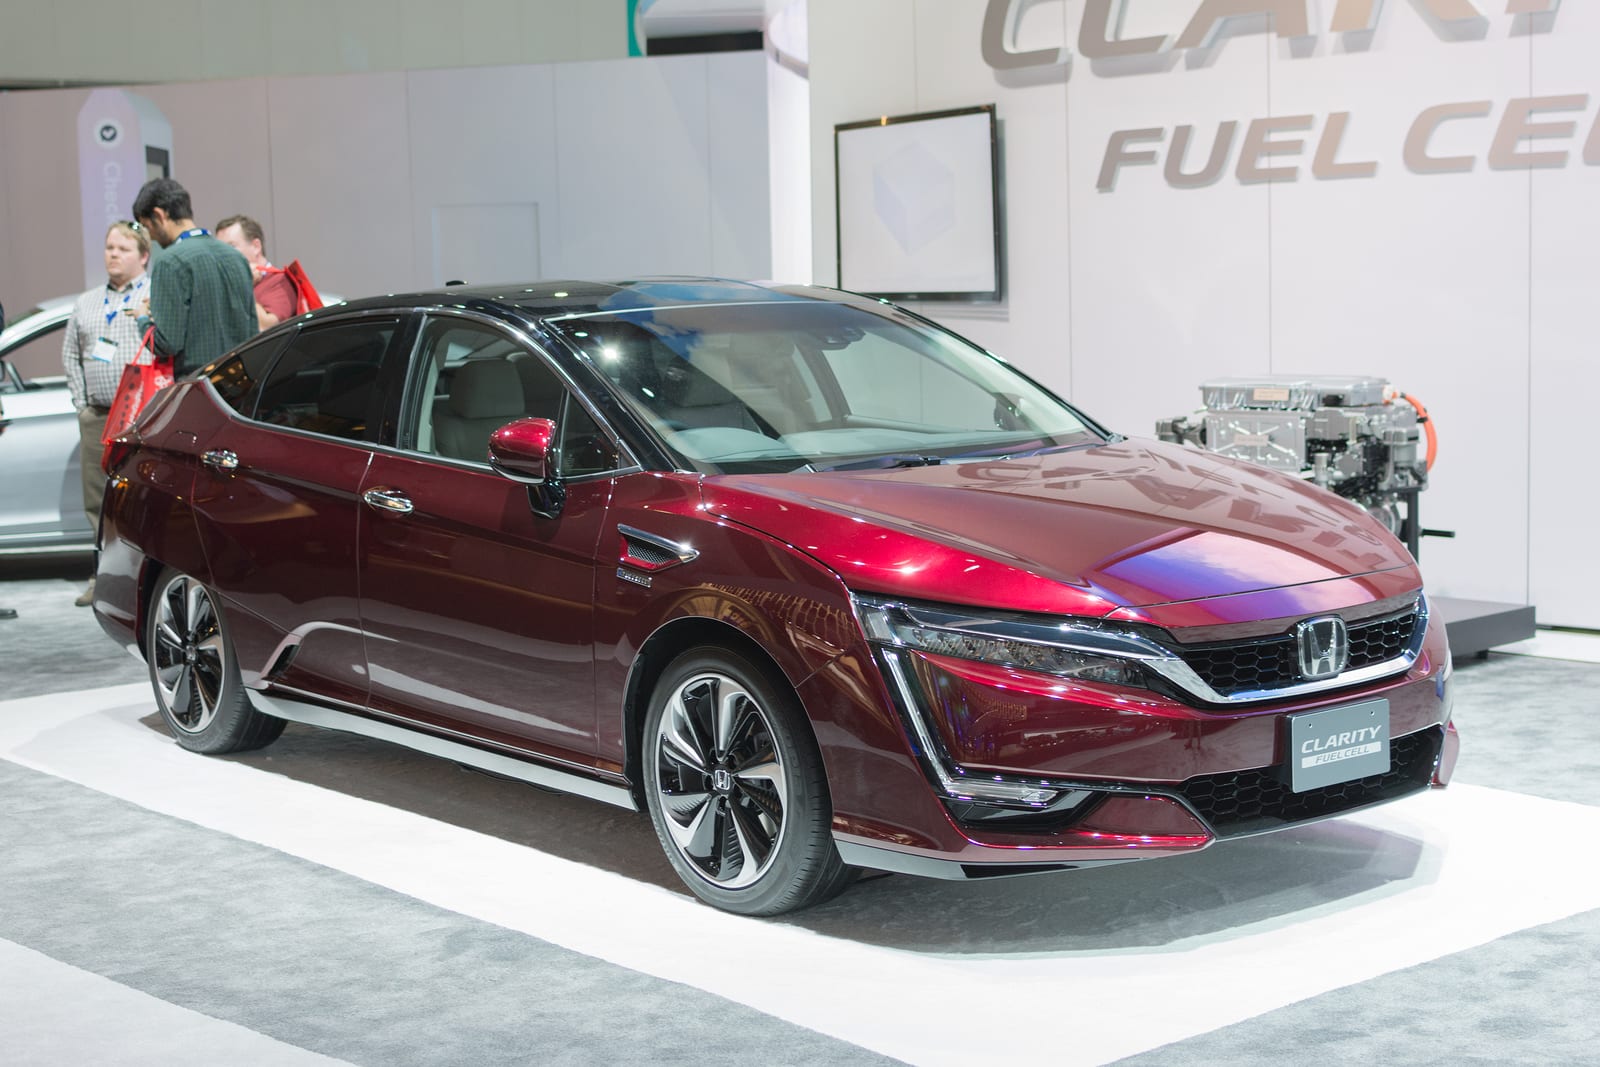 Honda Clarity - Hydrogen Fuel Cell Vehicle